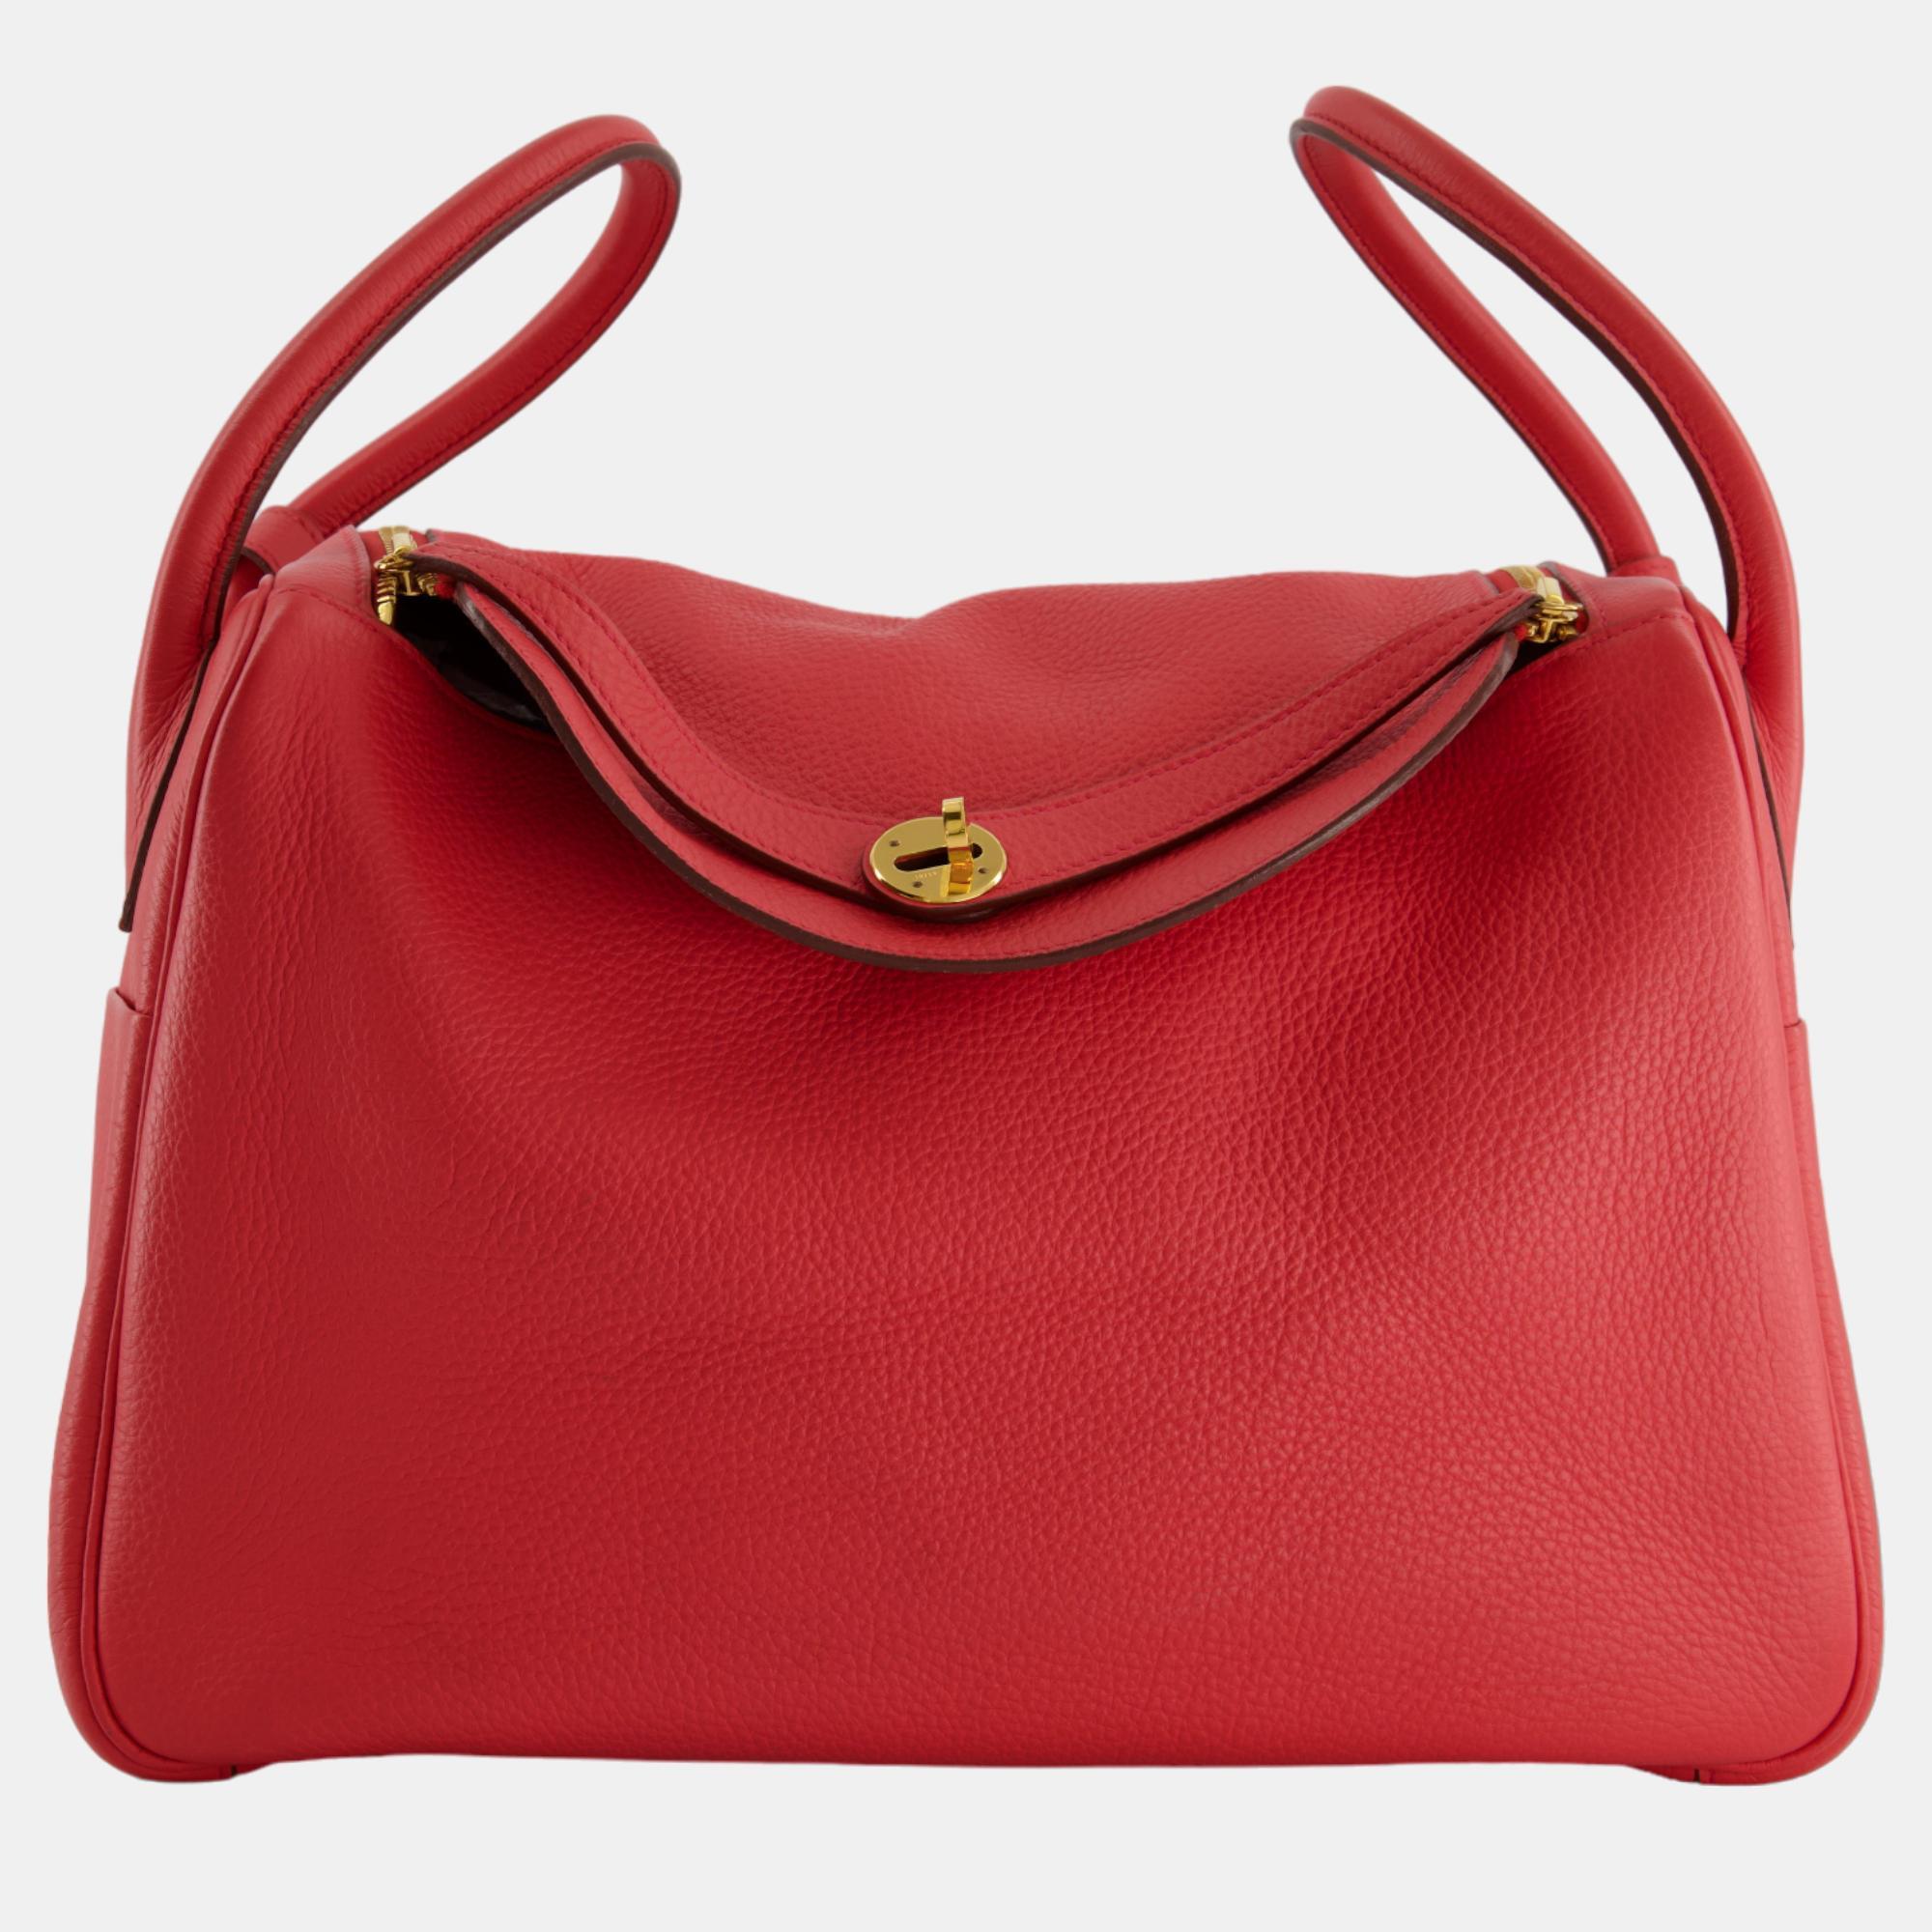 Hermes Lindy 34 Bag In Rose Jaipur Clemence Leather With Gold Hardware